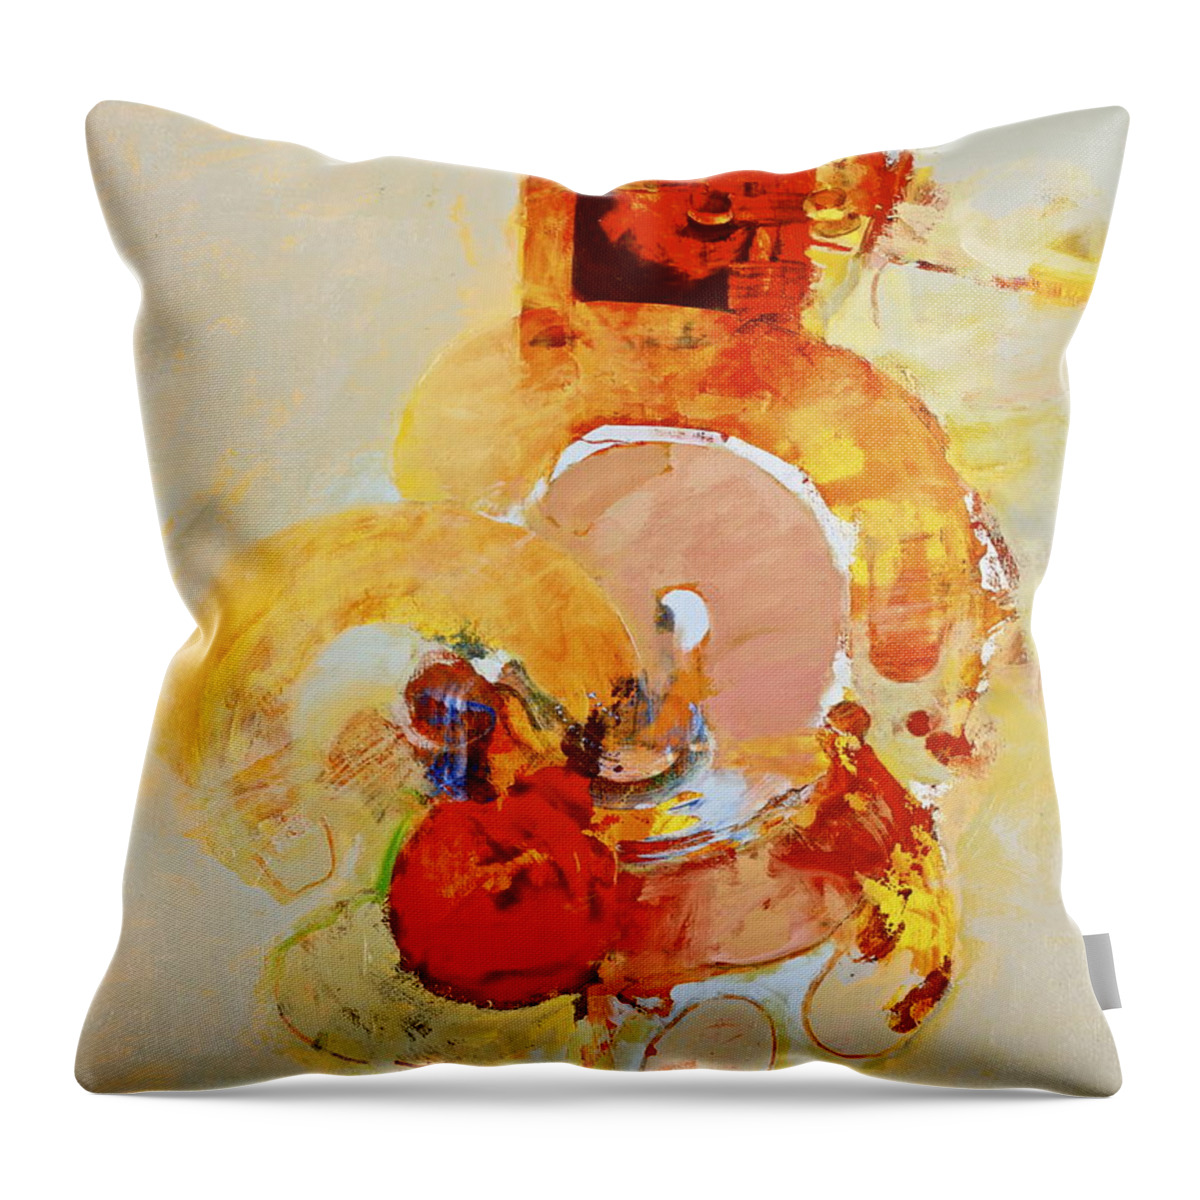 Abstract Paintings Throw Pillow featuring the painting Cocks Comb And Brush by Cliff Spohn